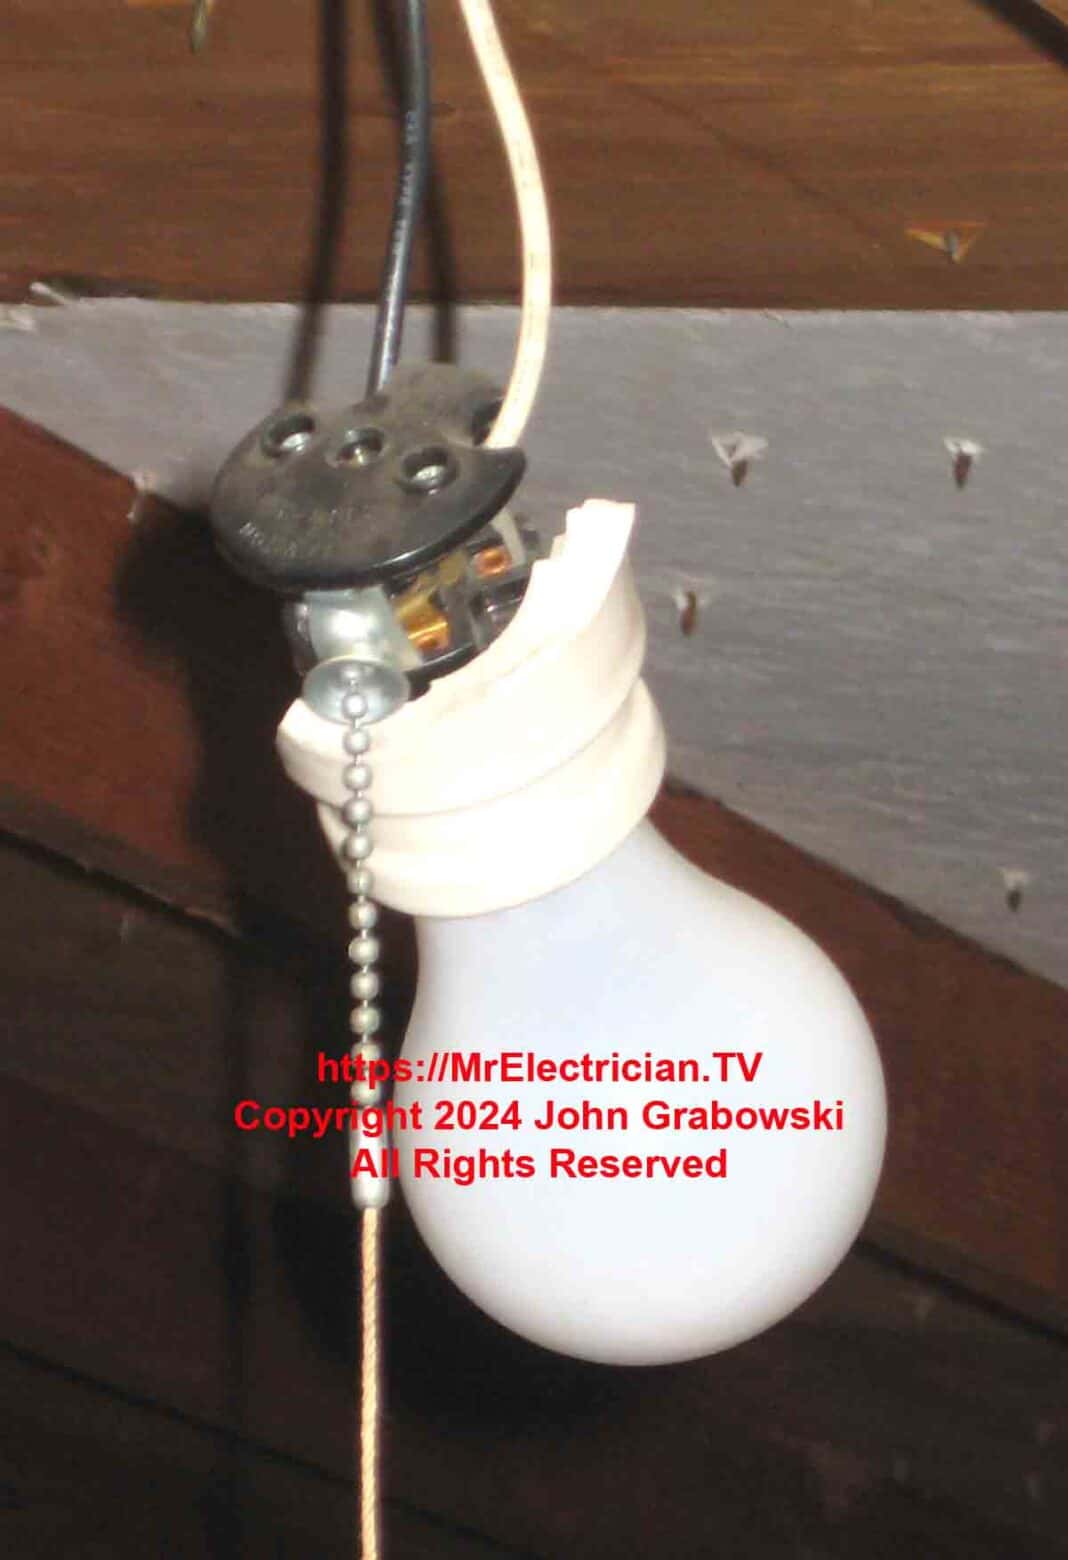 A close shot of a broken light bulb socket with a pull chain hanging by two electrical wires in an attic.